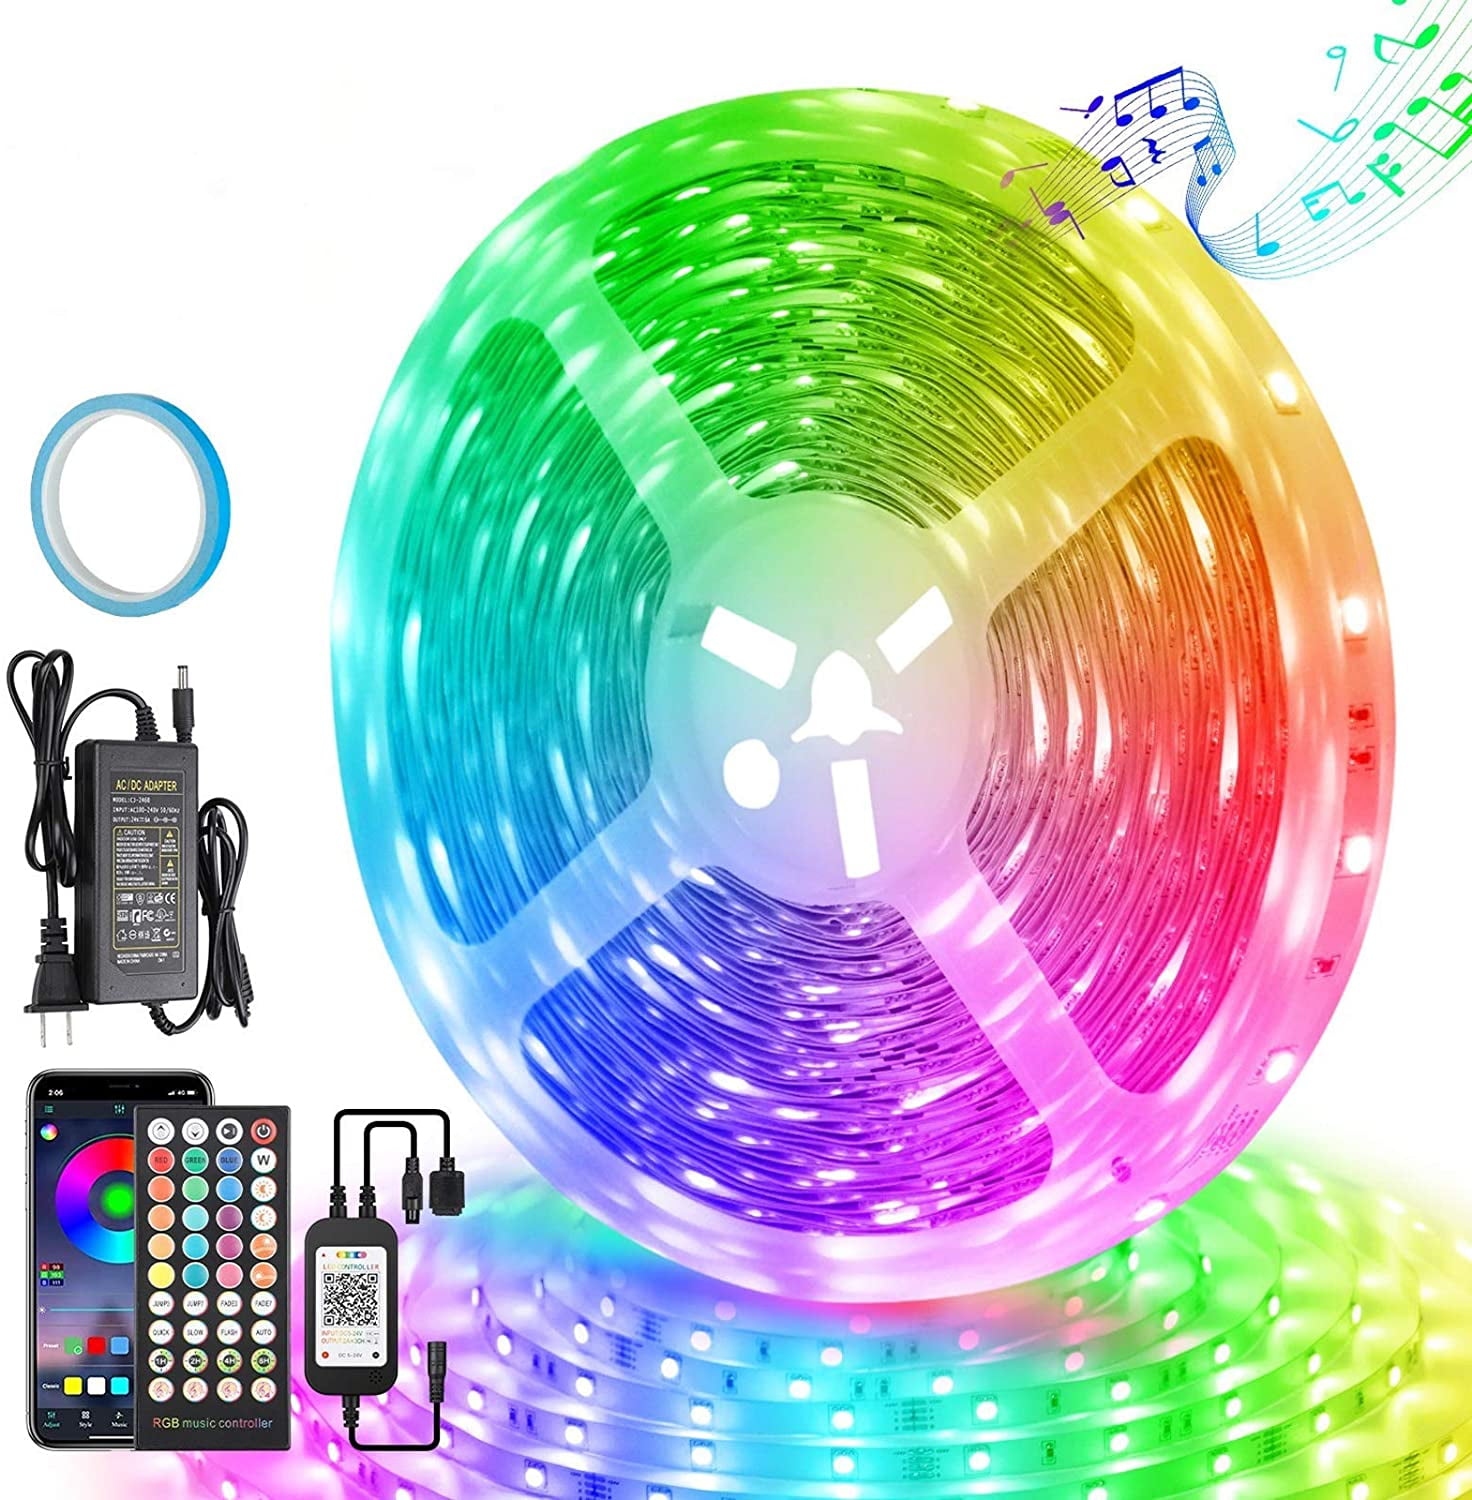 44 Keys IR Remote Controller and 12V Power Supply for Bedroom SONATA Color Changing Rope Lights 16.4ft SMD 5050 RGB 300LEDs Light Strips with Flexible Strip Light Home LED Strip Lights IP65 